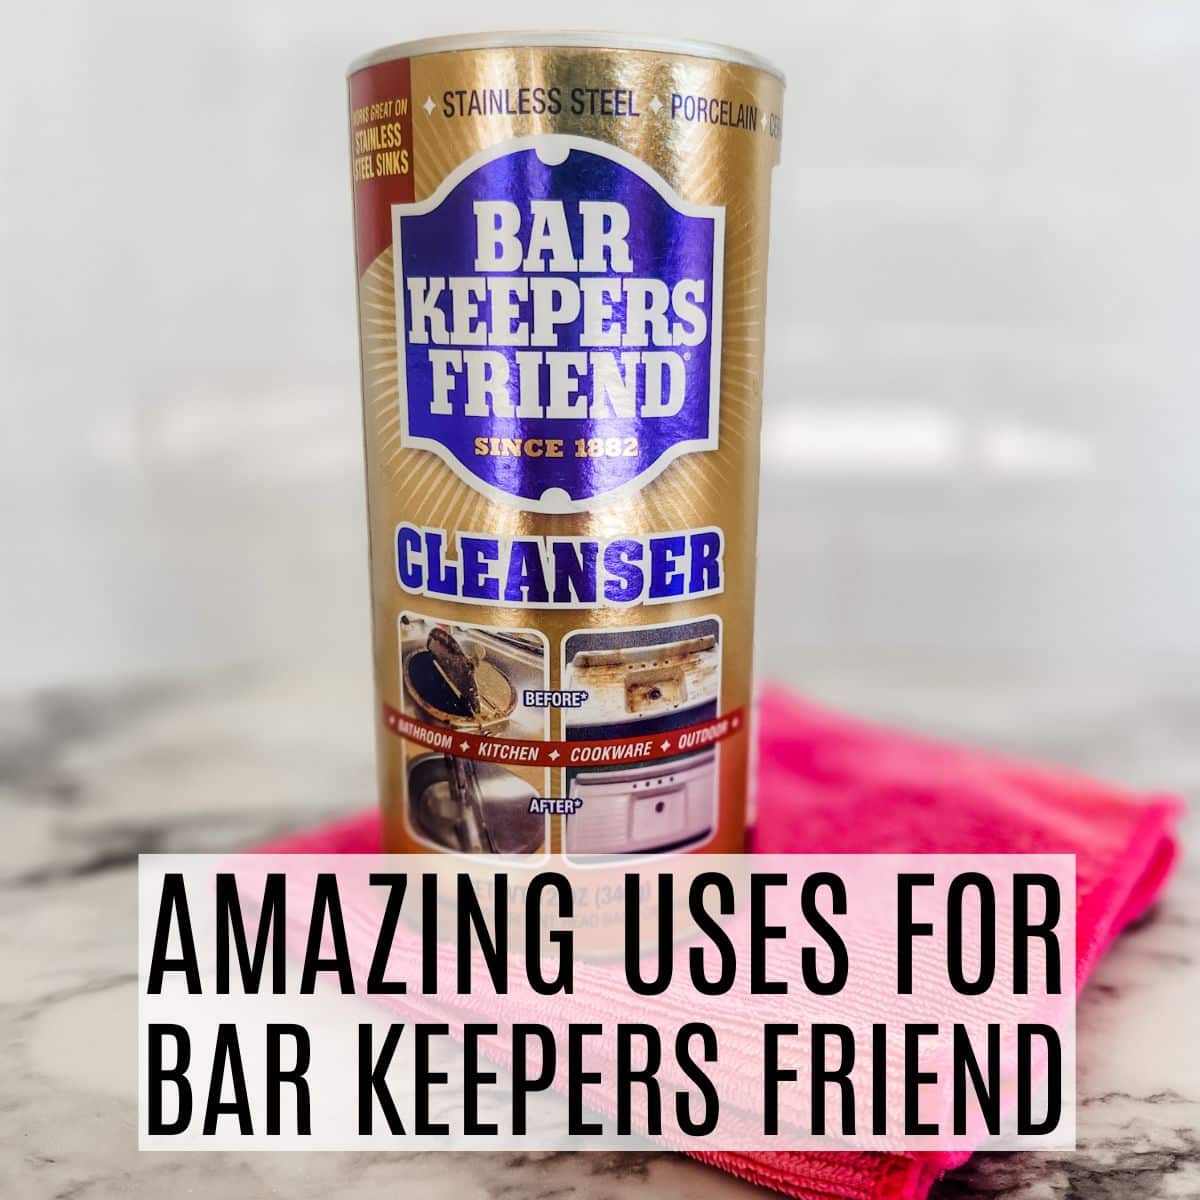 Bar keepers friend sitting on a pink microfiber with text overlay.